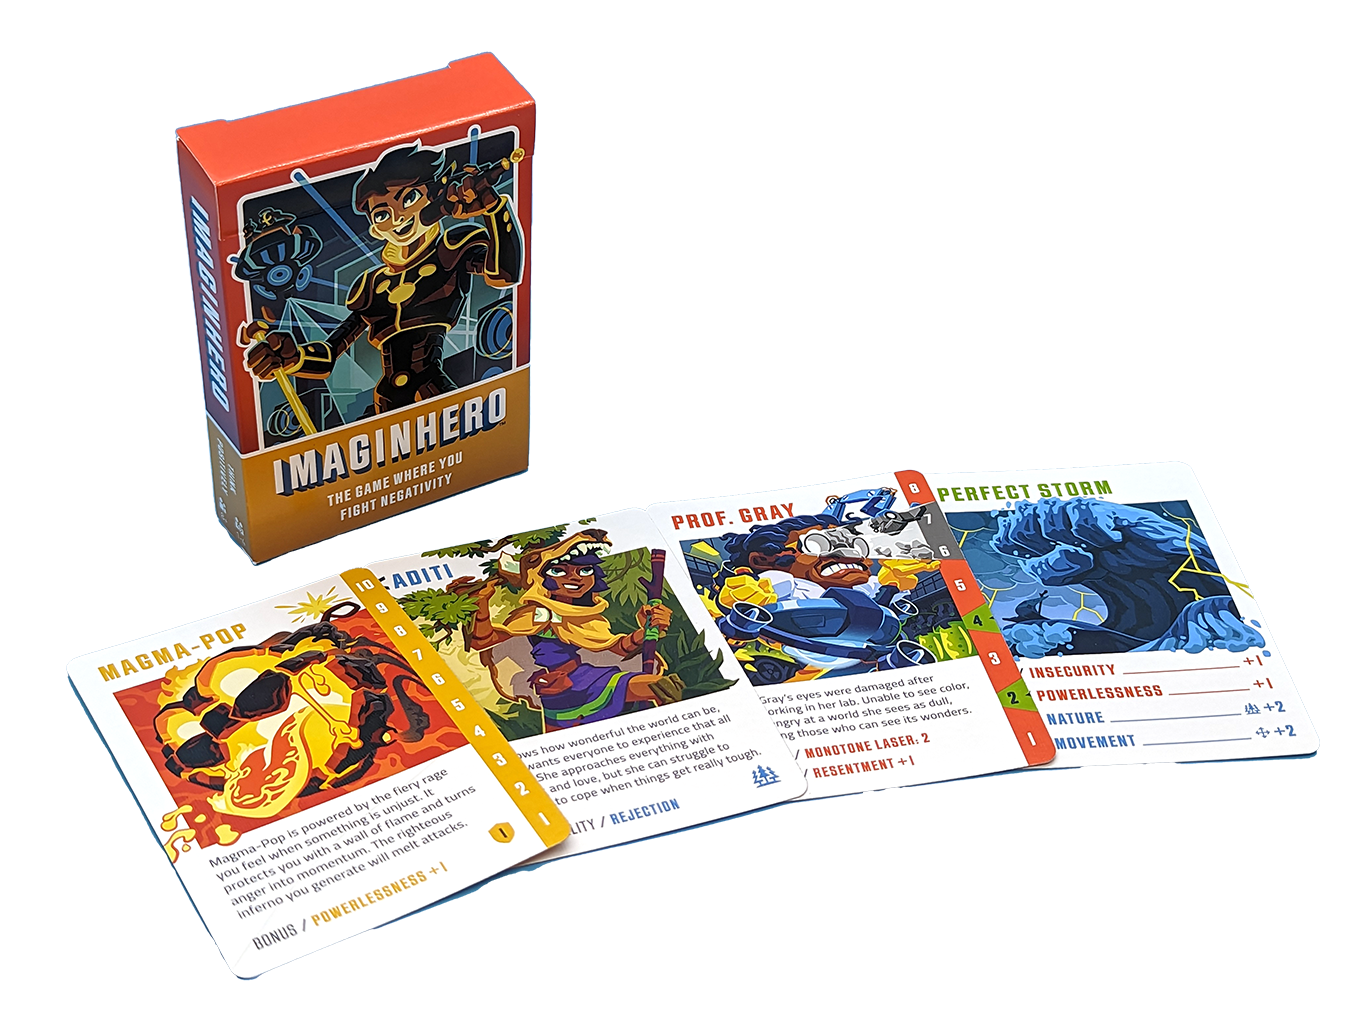 The slip cover of the Imaginhero card game, with 4 cards from the deck laid out in front.